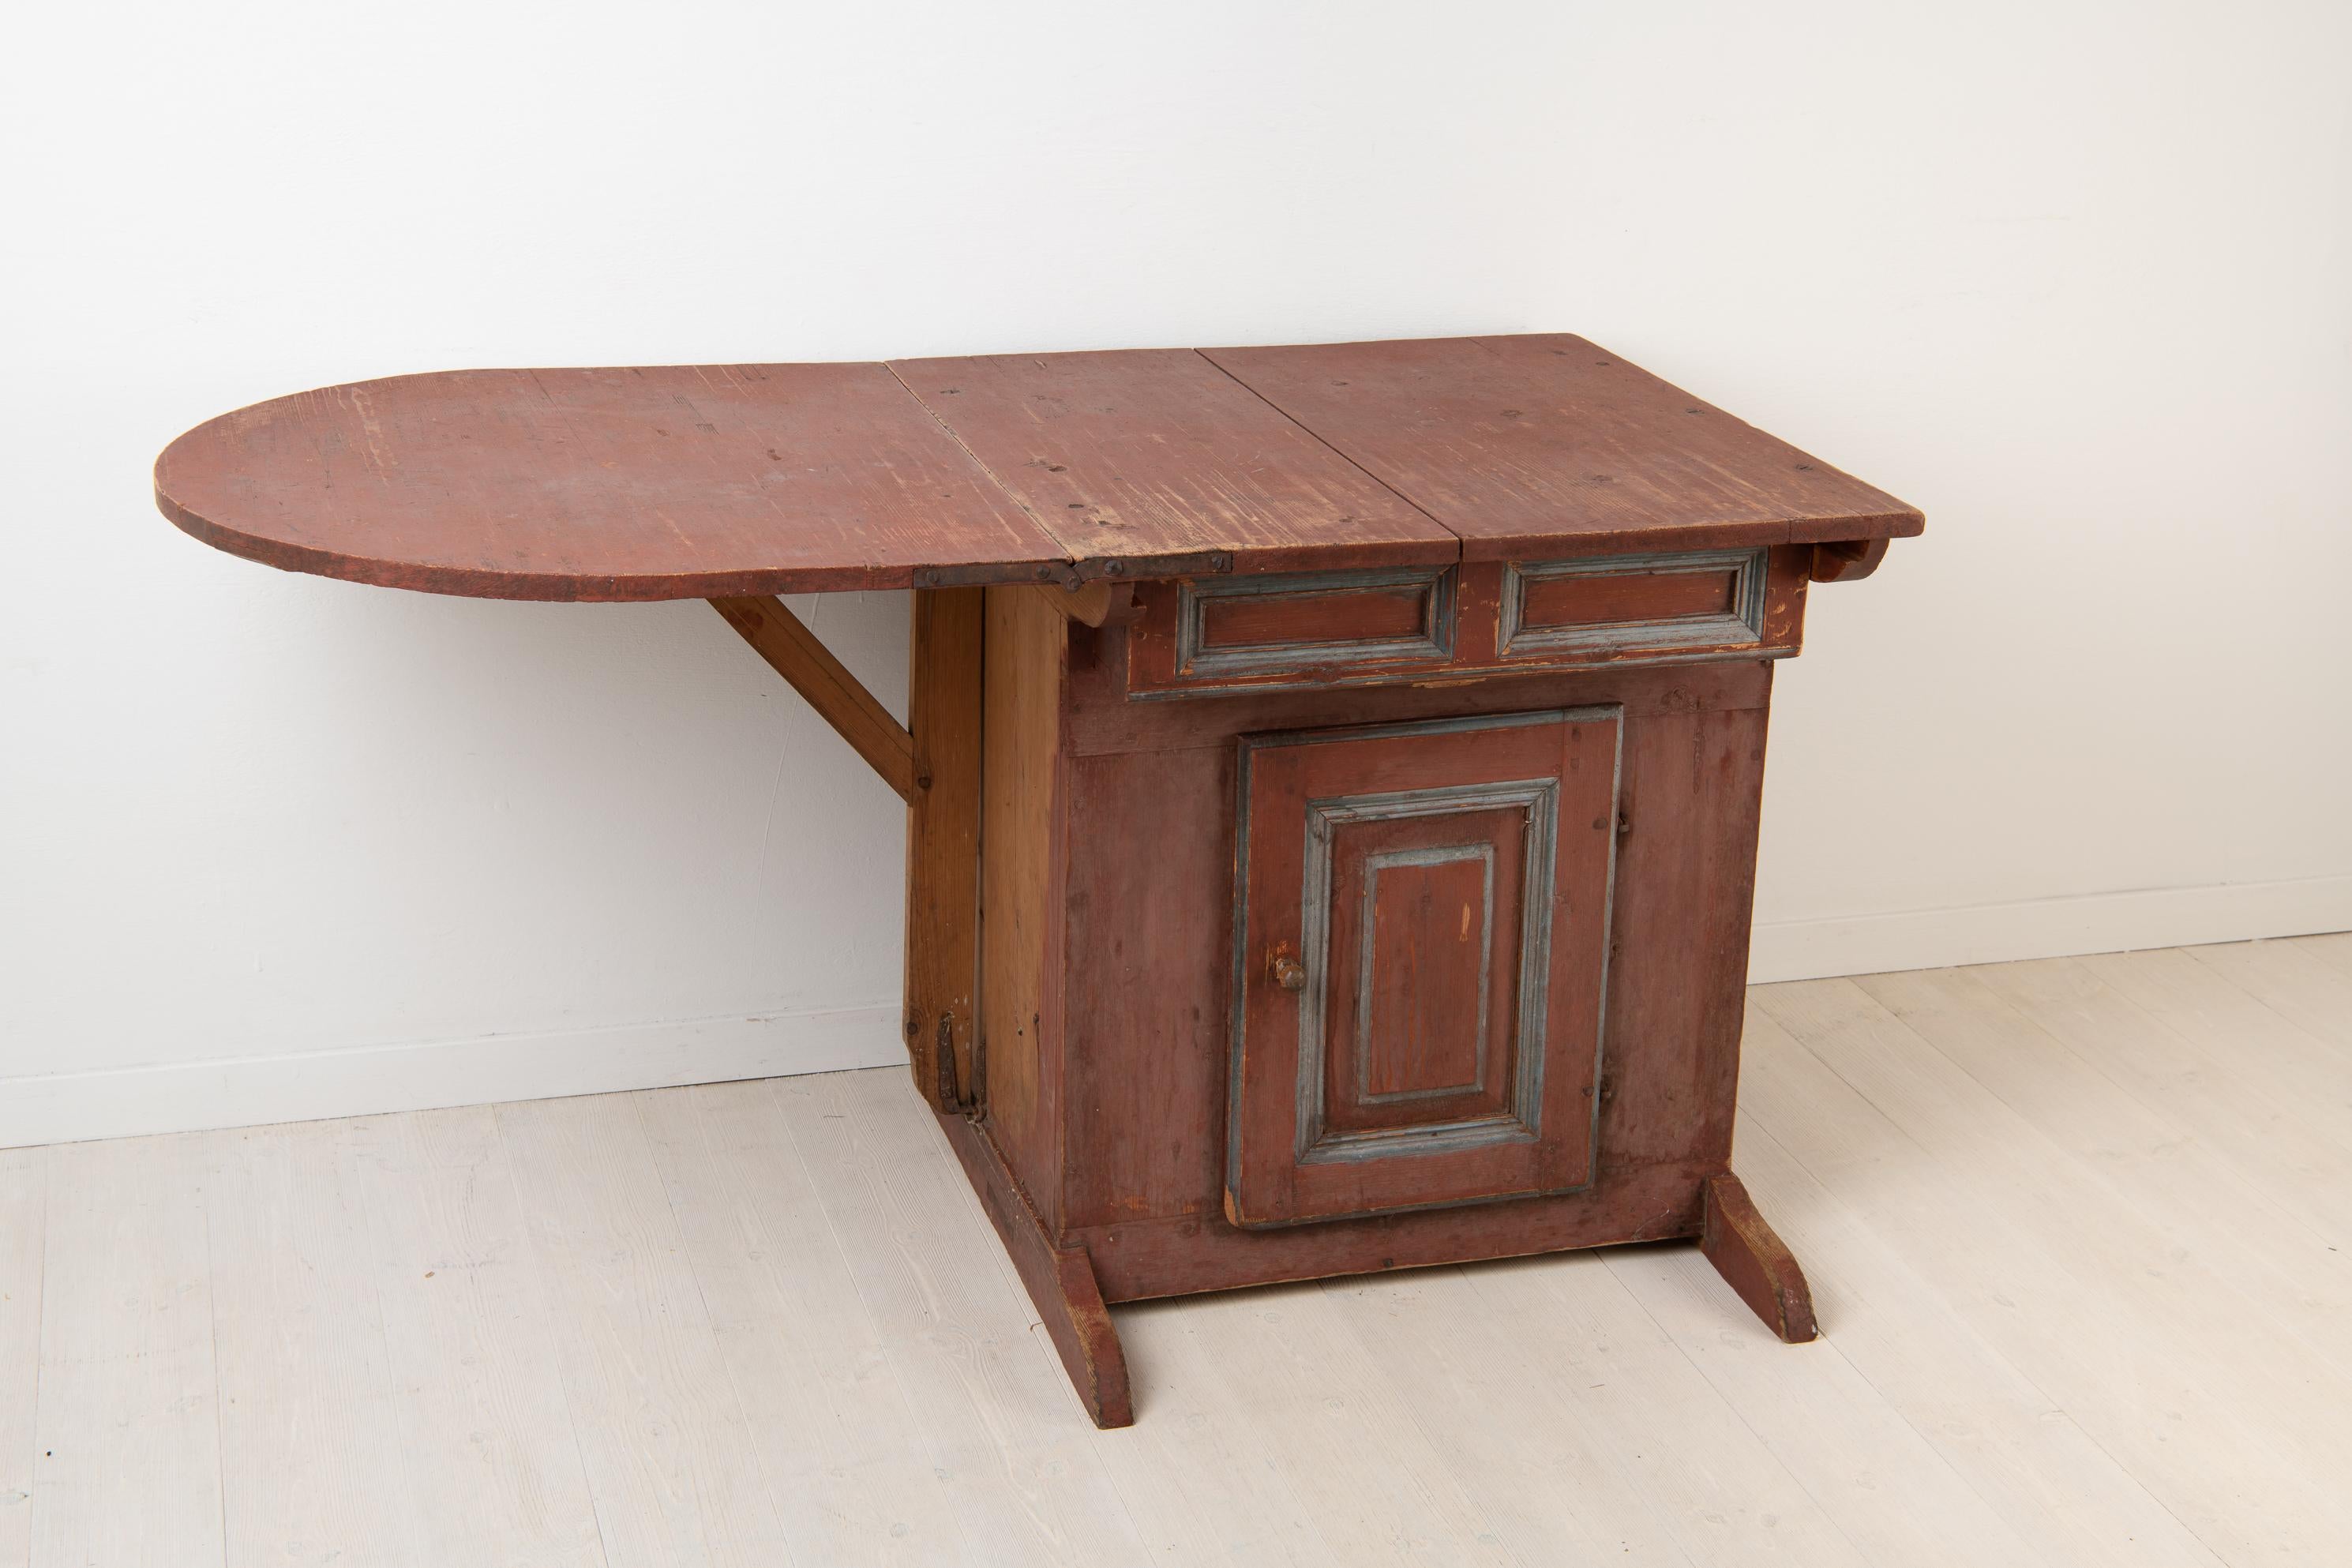 Primitive 18th Century Swedish Extendable Wall Table In Good Condition For Sale In Kramfors, SE